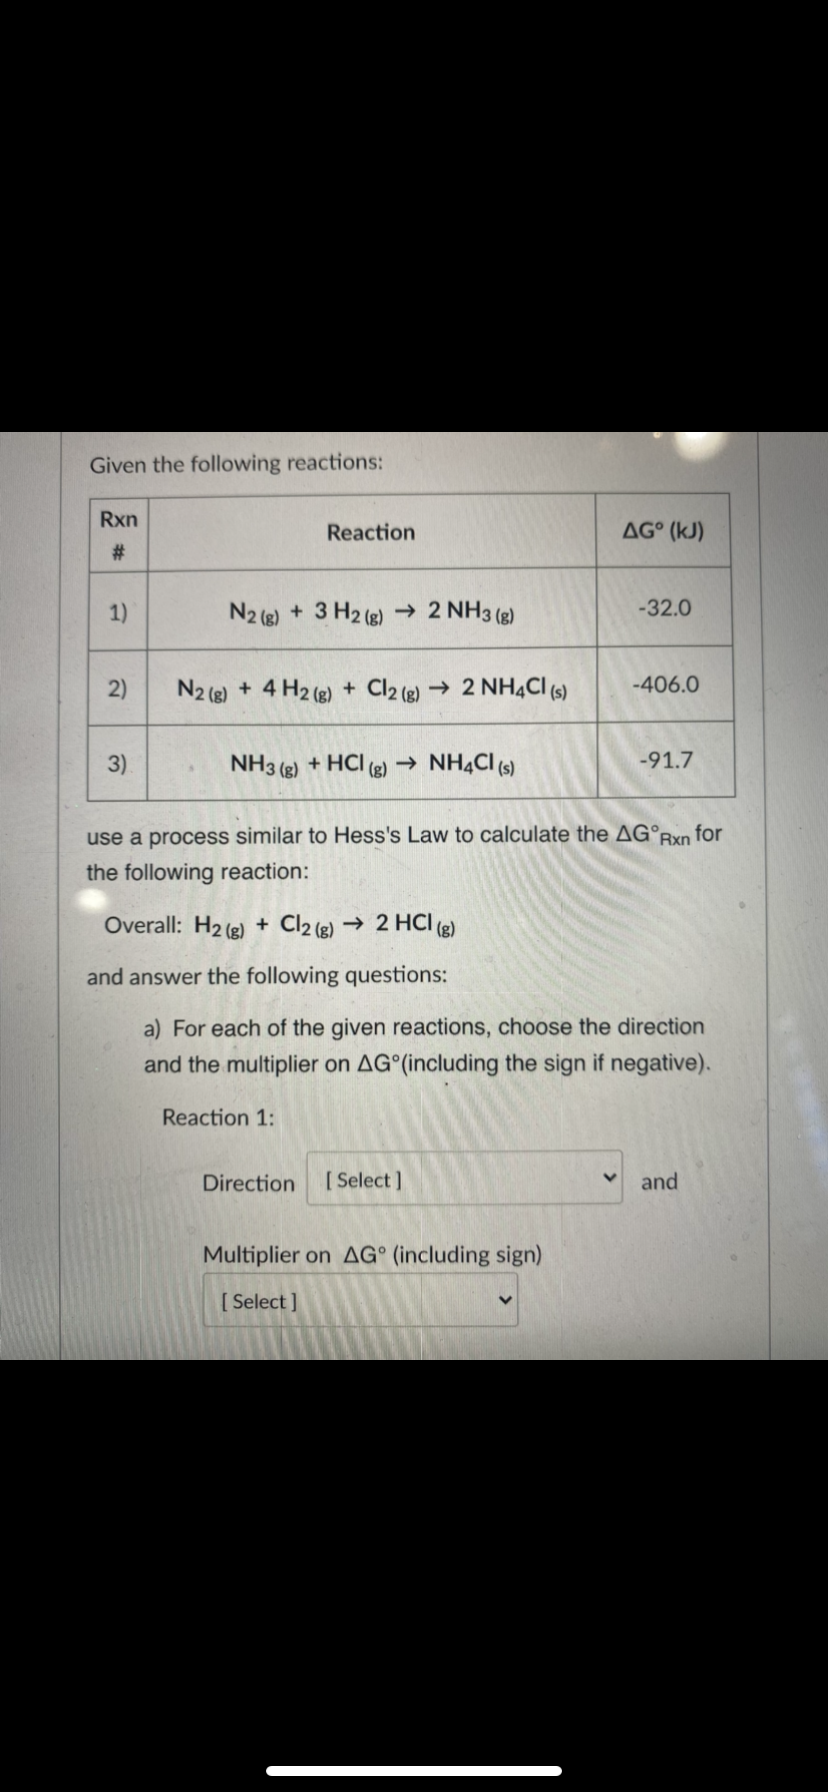 Given the following reactions:
Rxn
Reaction
AG° (kJ)
#:
1)
N2 (g) + 3 H2 (g) → 2 NH3 (g)
-32.0
2)
N2 (8) + 4 H2 (e) + Cl2 (e) → 2 NH4CI (s)
-406.0
3)
NH3 (2) + HCI (g) → NHẠCI (s)
-91.7
use a process similar to Hess's Law to calculate the AG°Rxn for
the following reaction:
Overall: H2 (2) + Cl2 (g) → 2 HCI (g)
and answer the following questions:
a) For each of the given reactions, choose the direction
and the multiplier on AG (including the sign if negative).
Reaction 1:
Direction
[ Select ]
and
Multiplier on AG° (including sign)
[ Select ]
